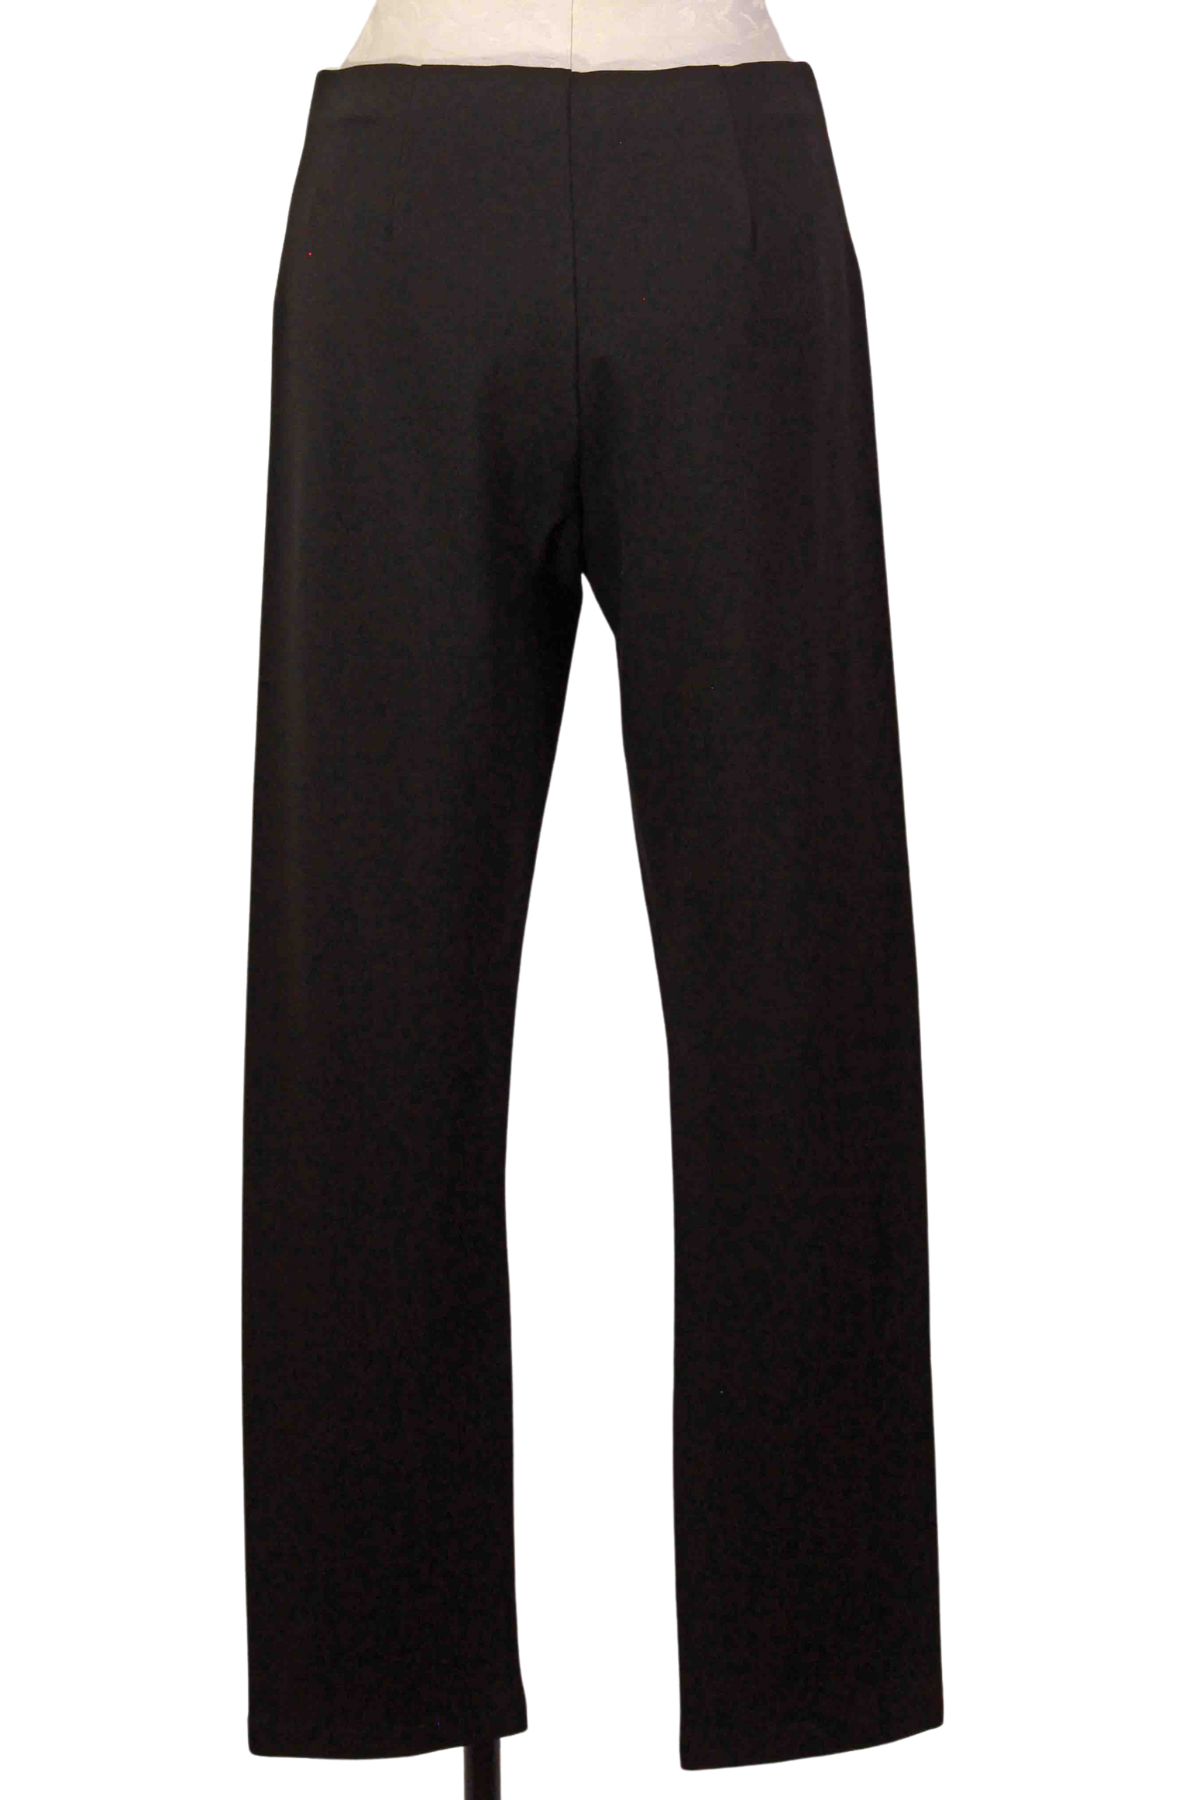 back view of black Ponte Slightly Tapered Pant by Habitat